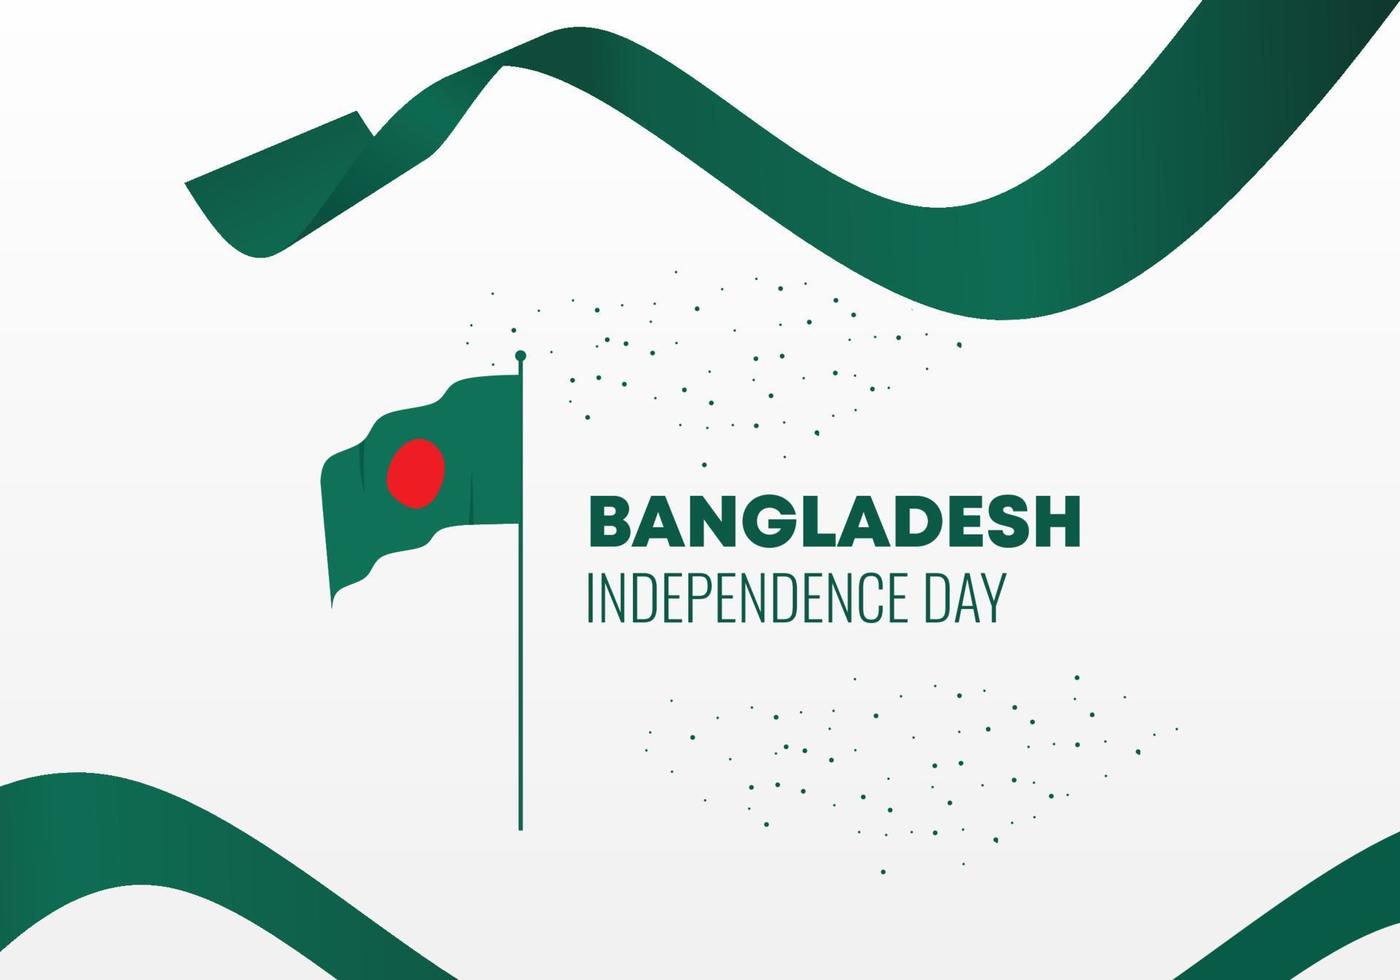 Bangladesh independence day background on March 26. vector